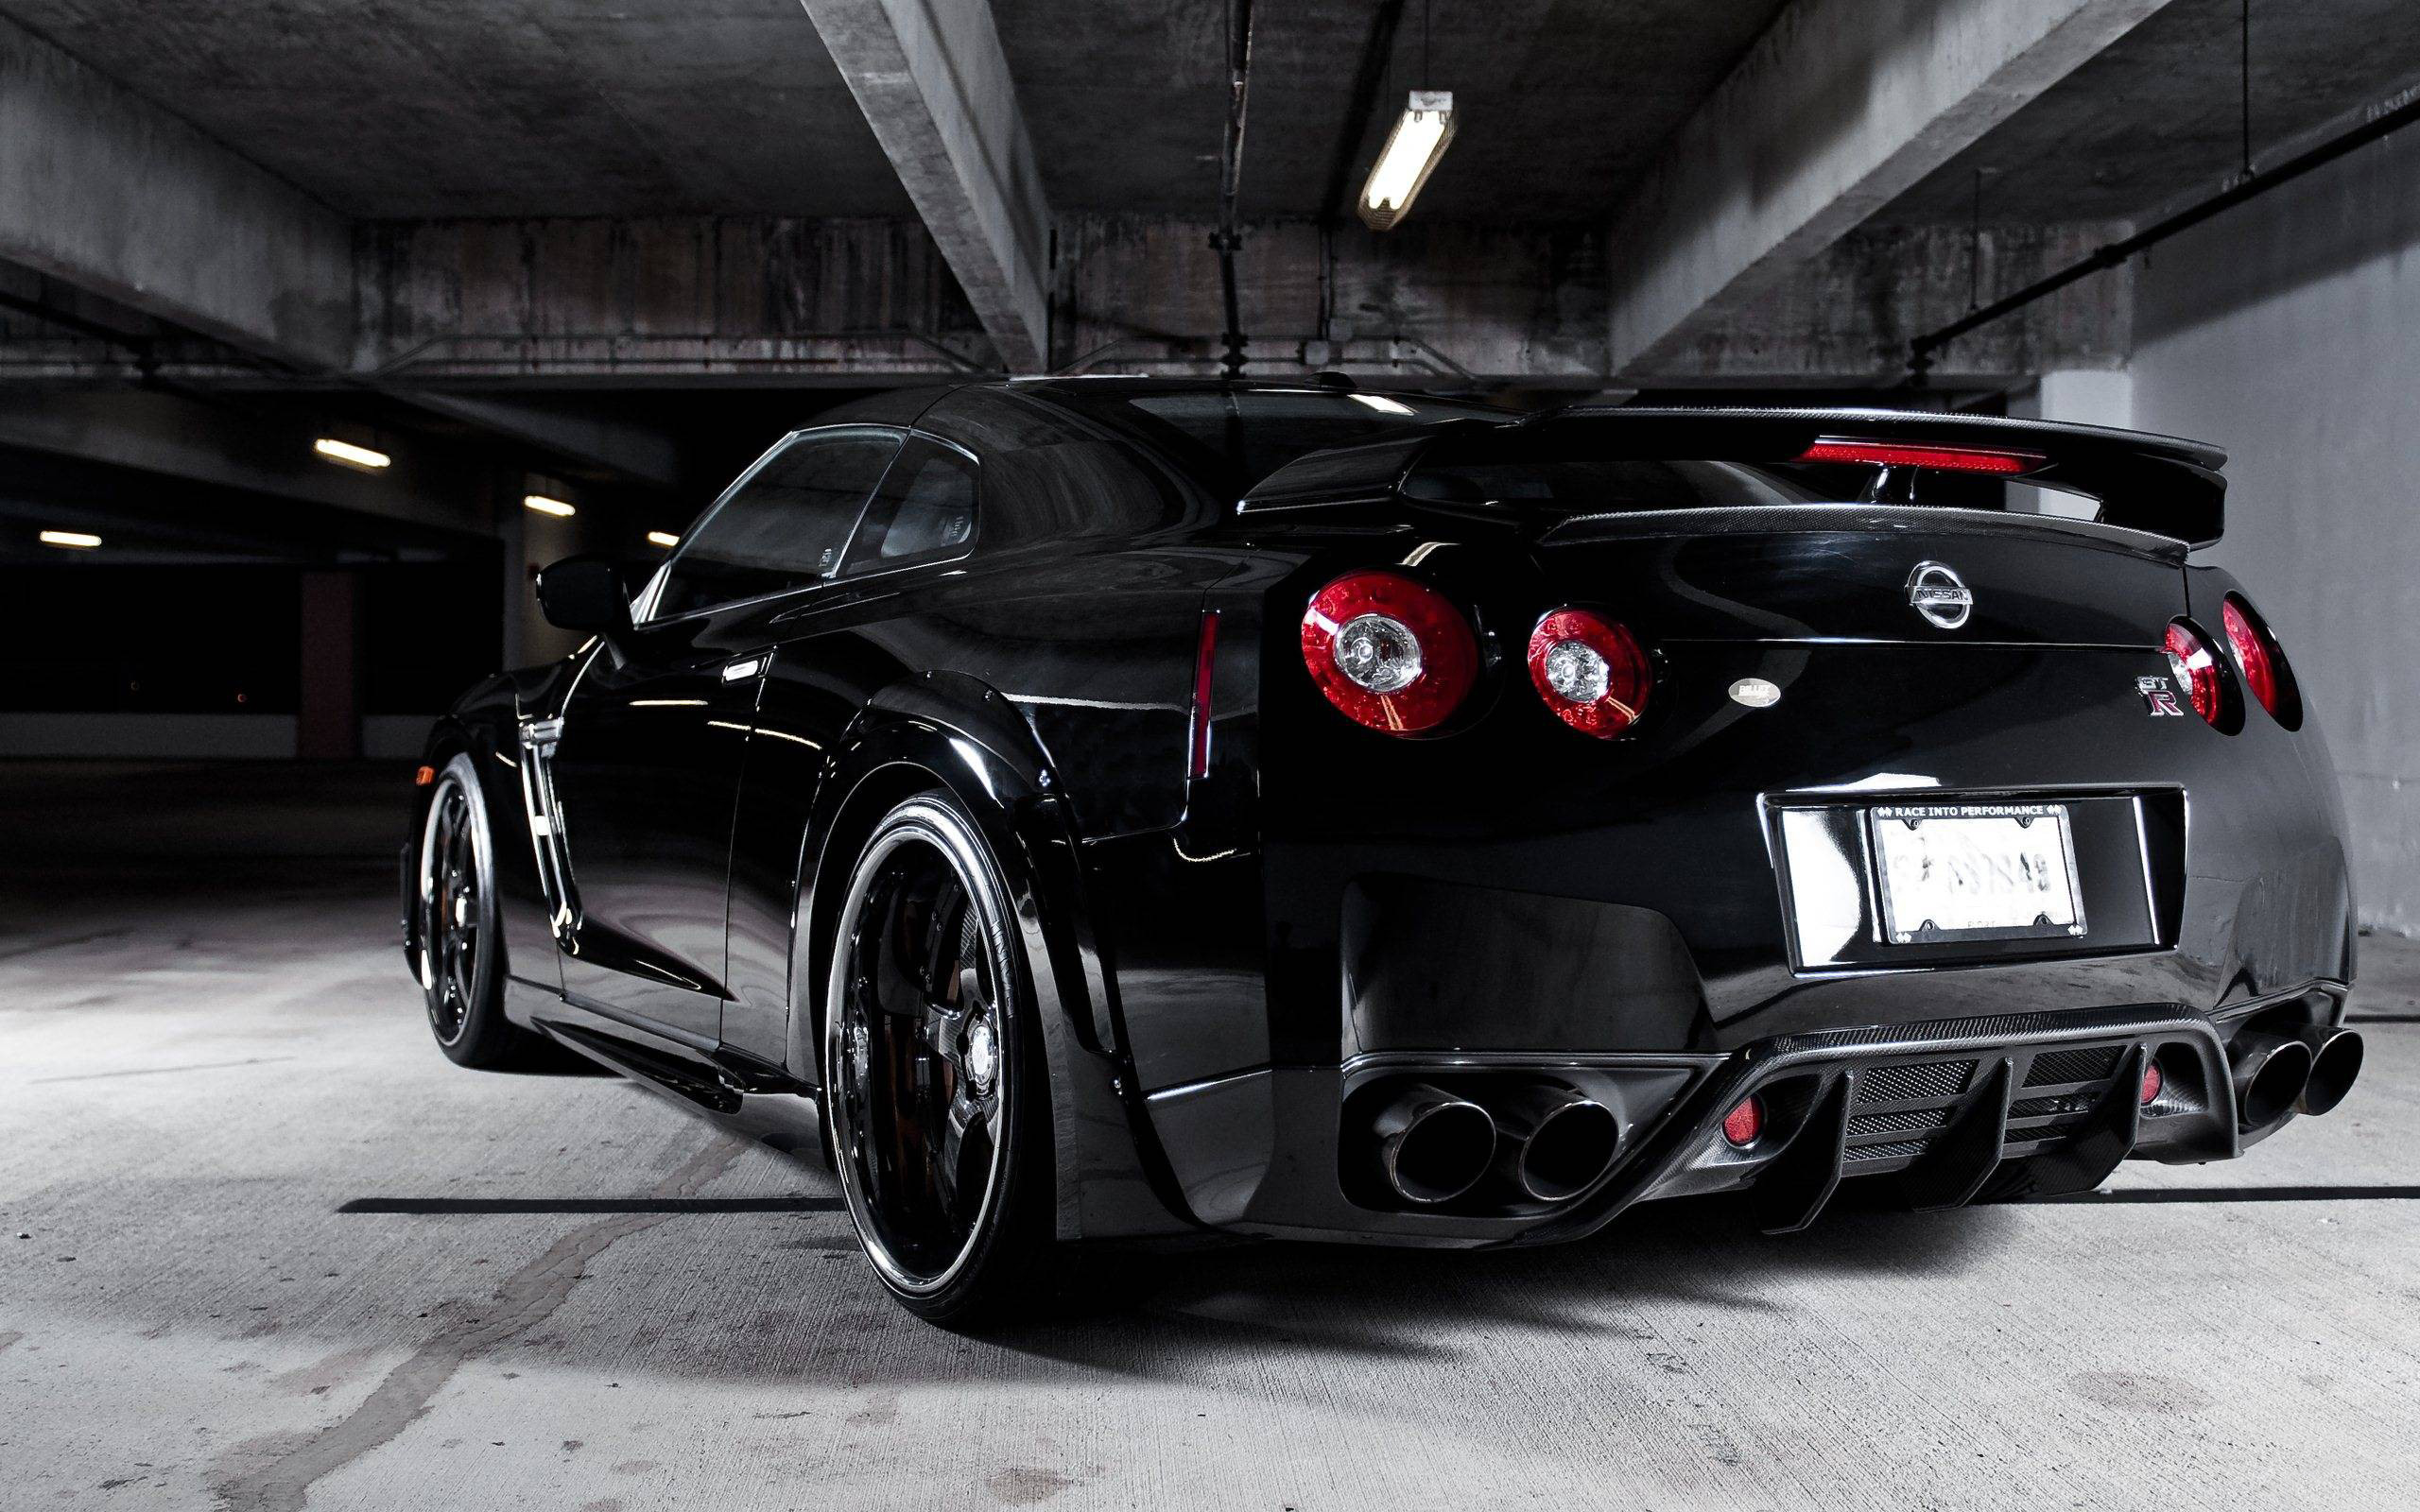 Awesome Nissan Wallpaper